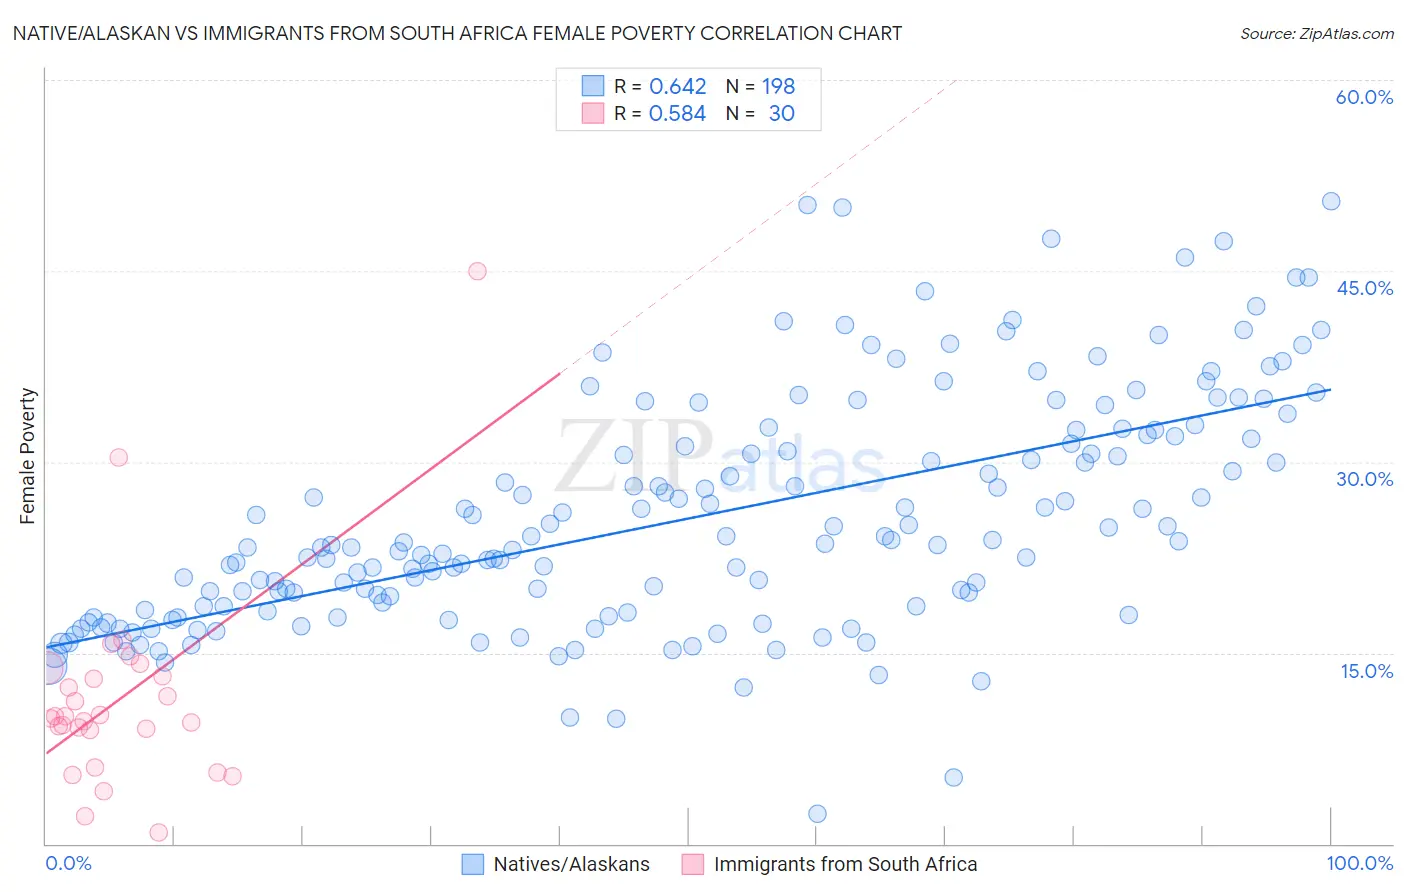 Native/Alaskan vs Immigrants from South Africa Female Poverty